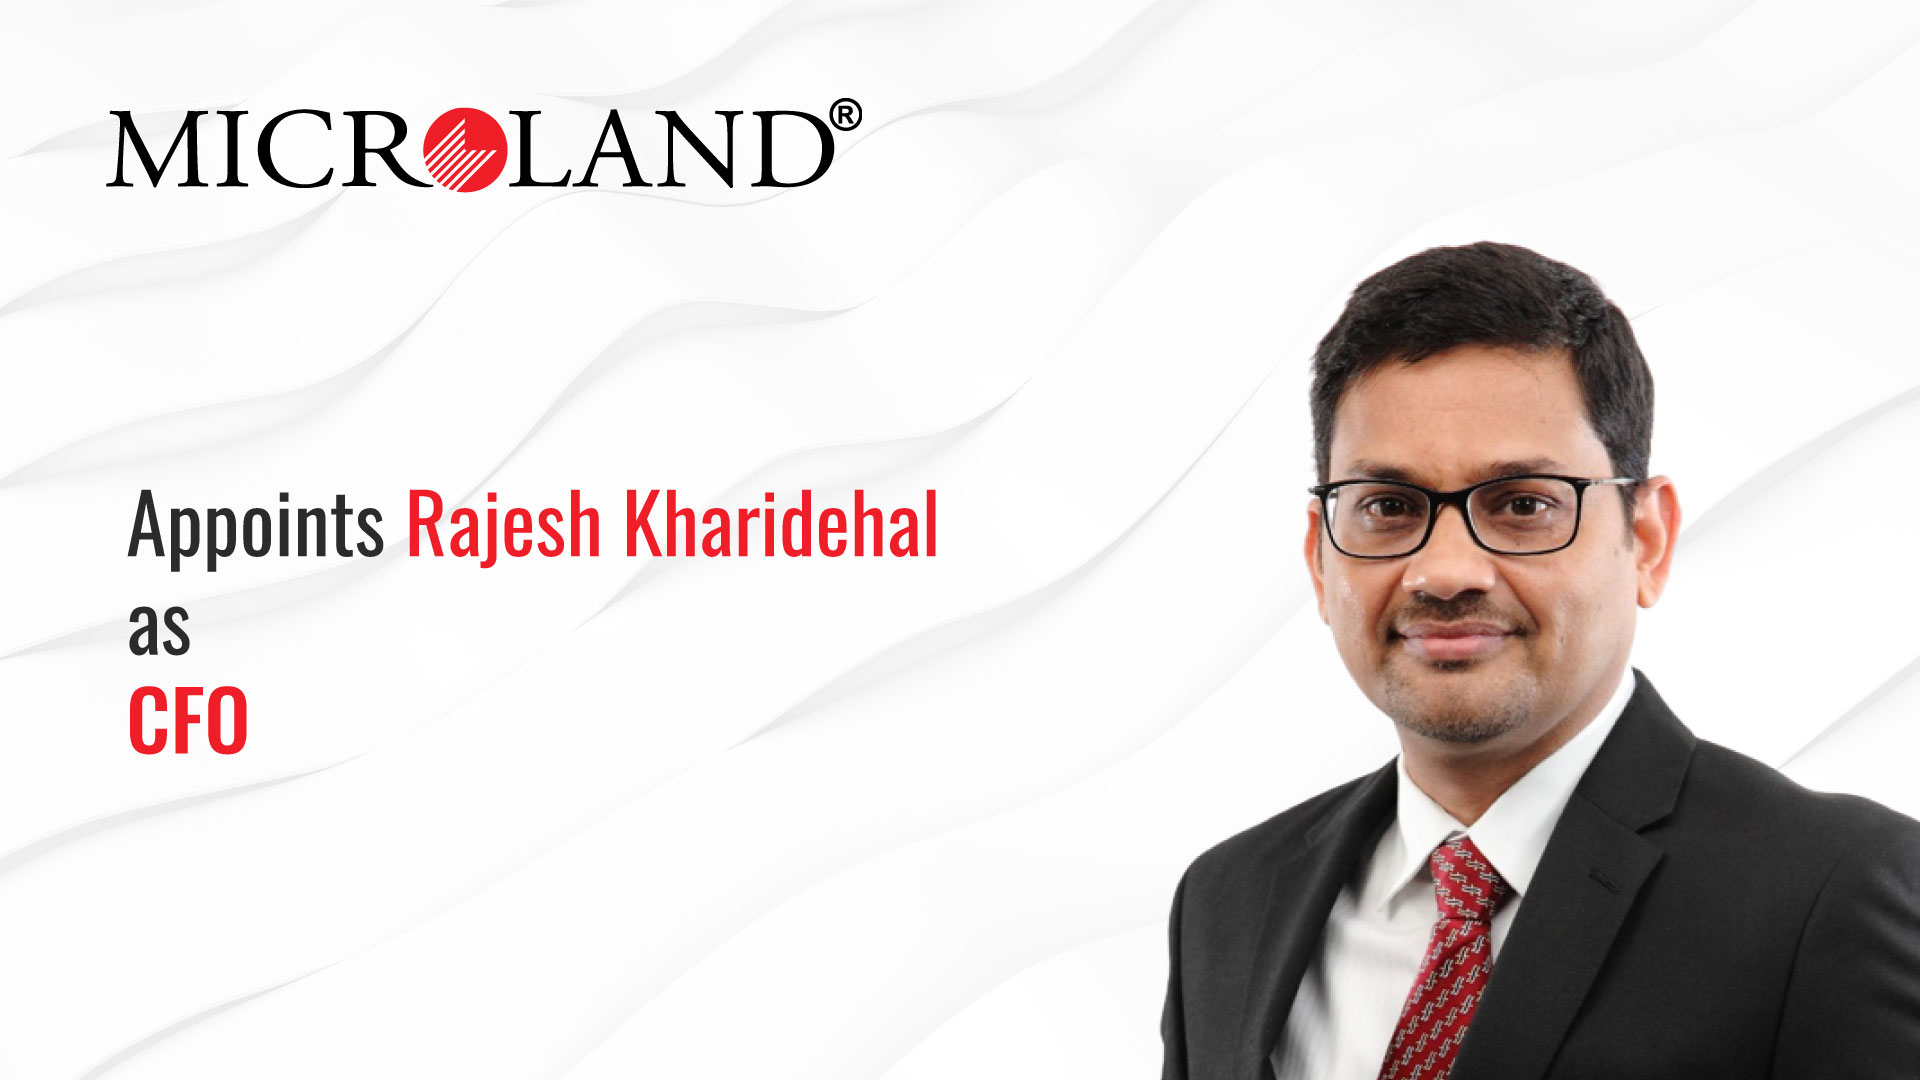 Microland Appoints Rajesh Kharidehal as Chief Financial Officer